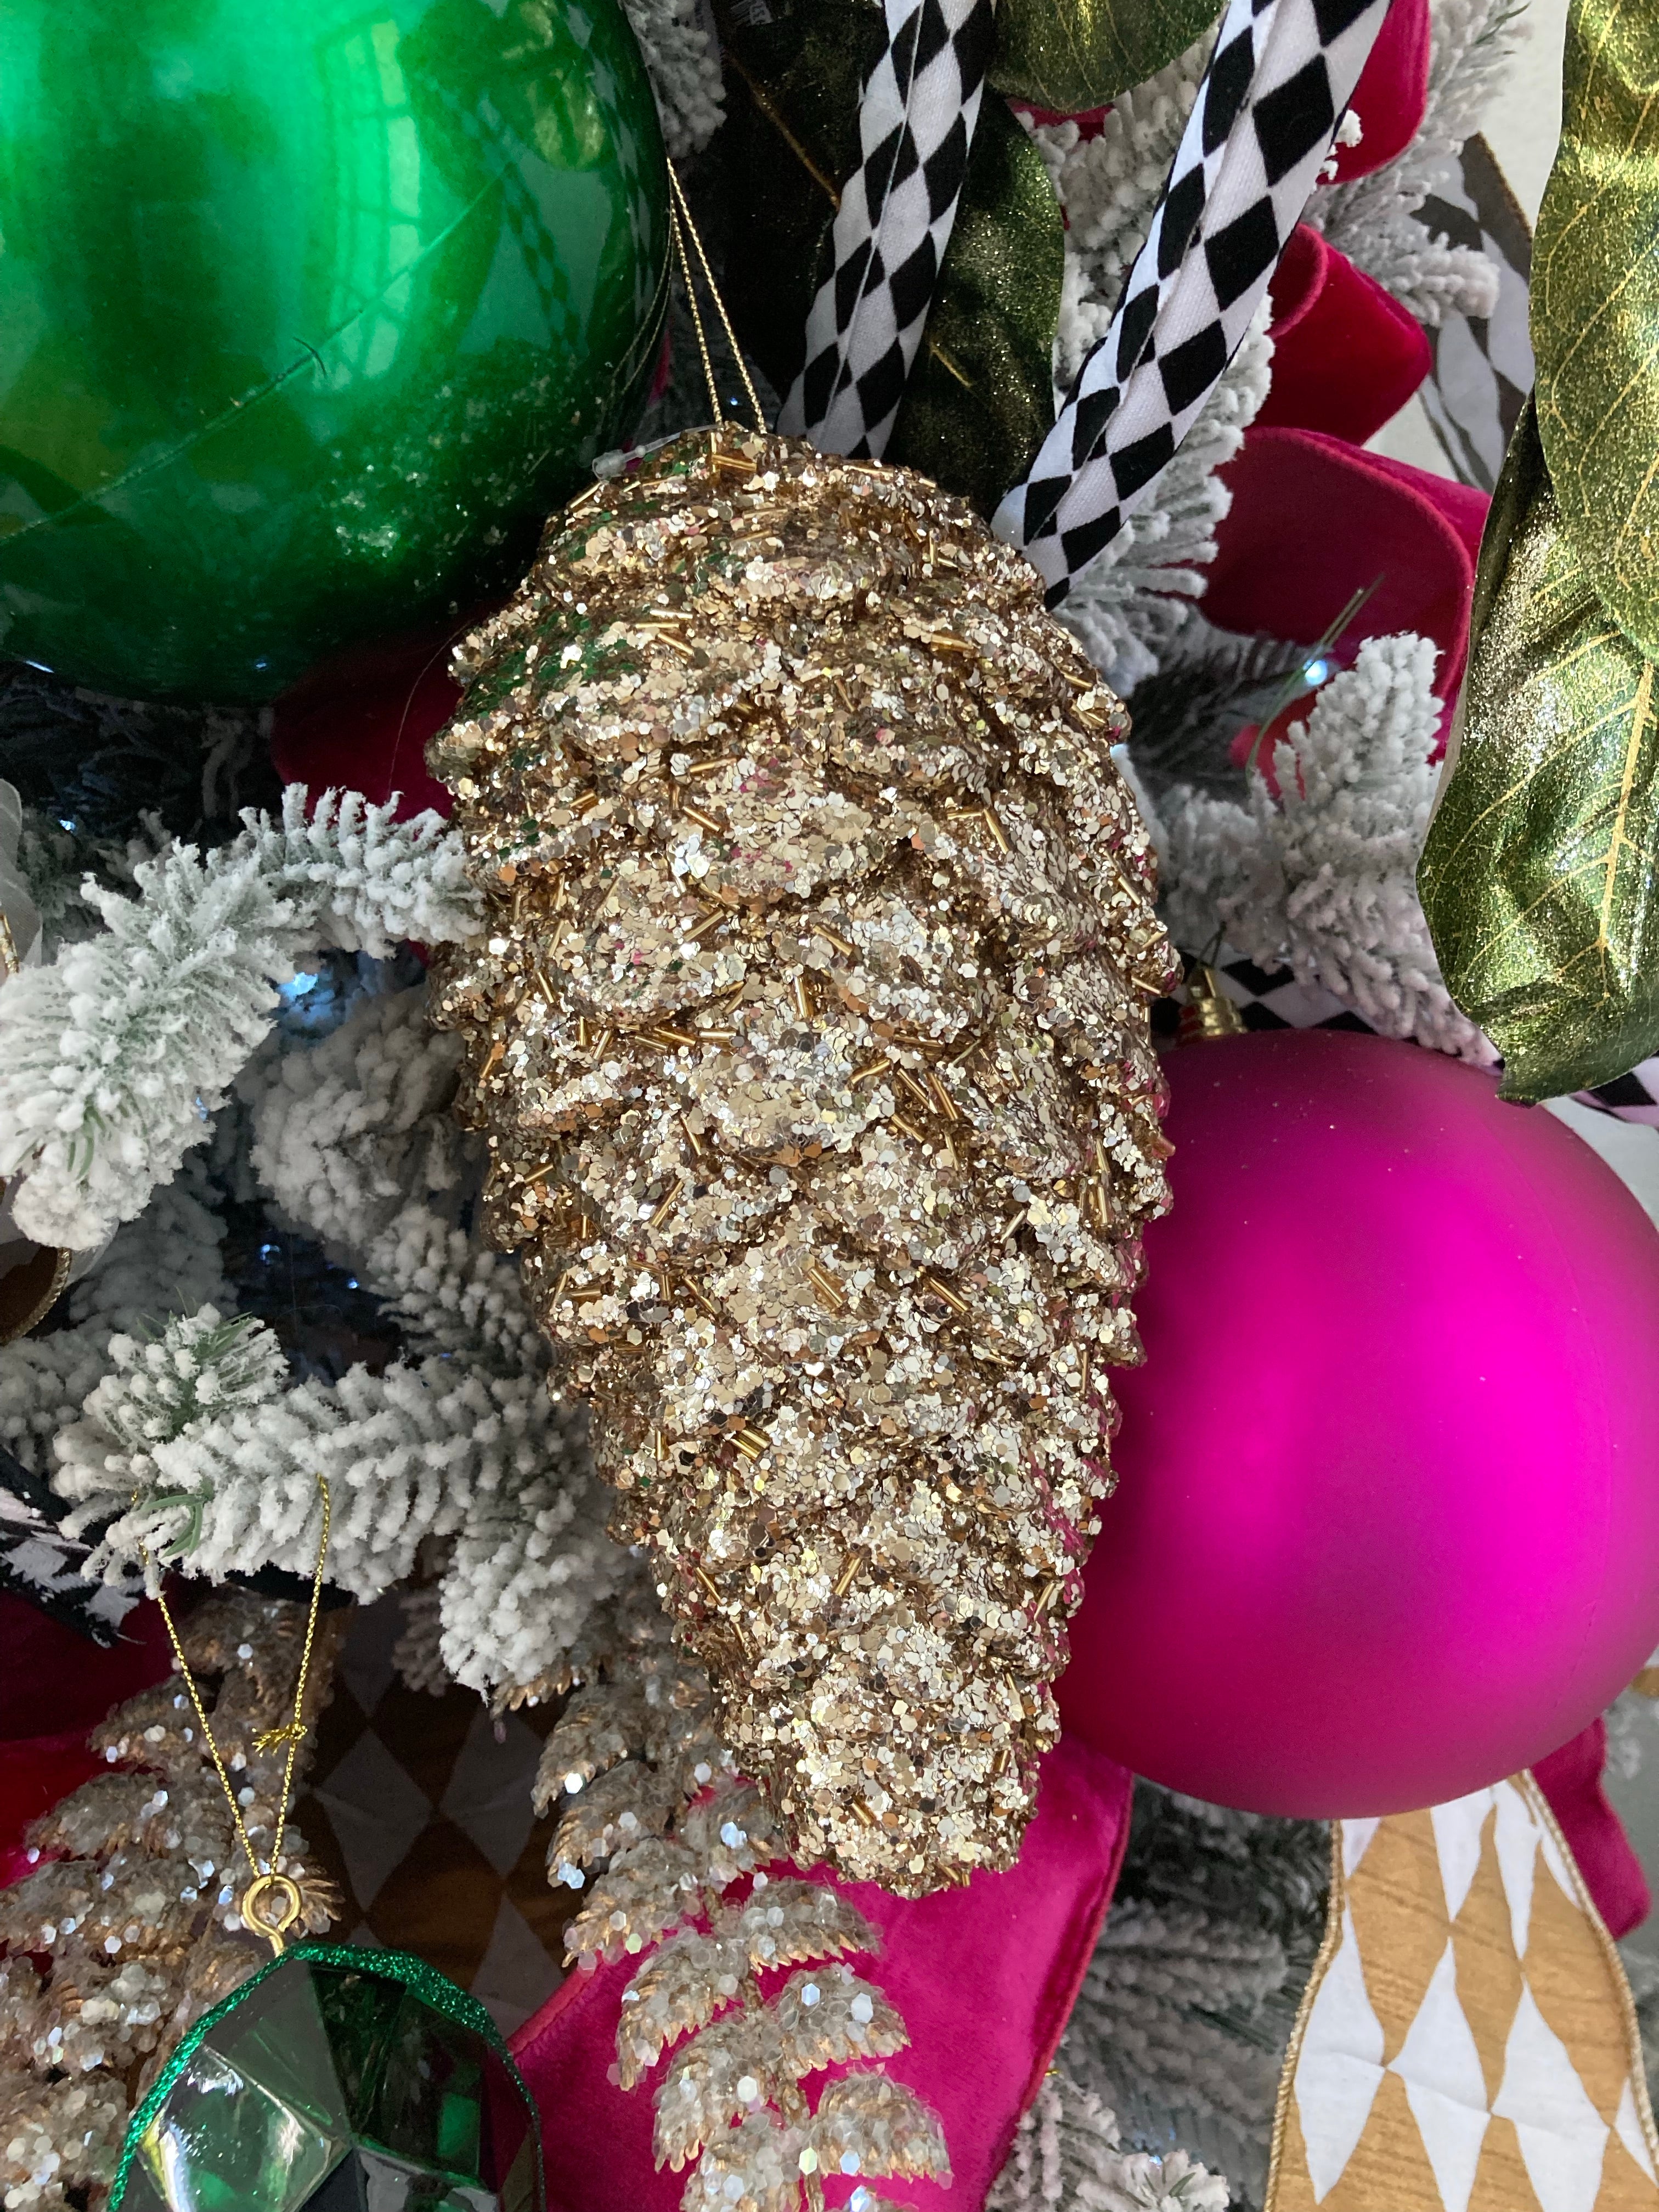 Gold Glitter Pinecone Ornament - Available in Two Sizes